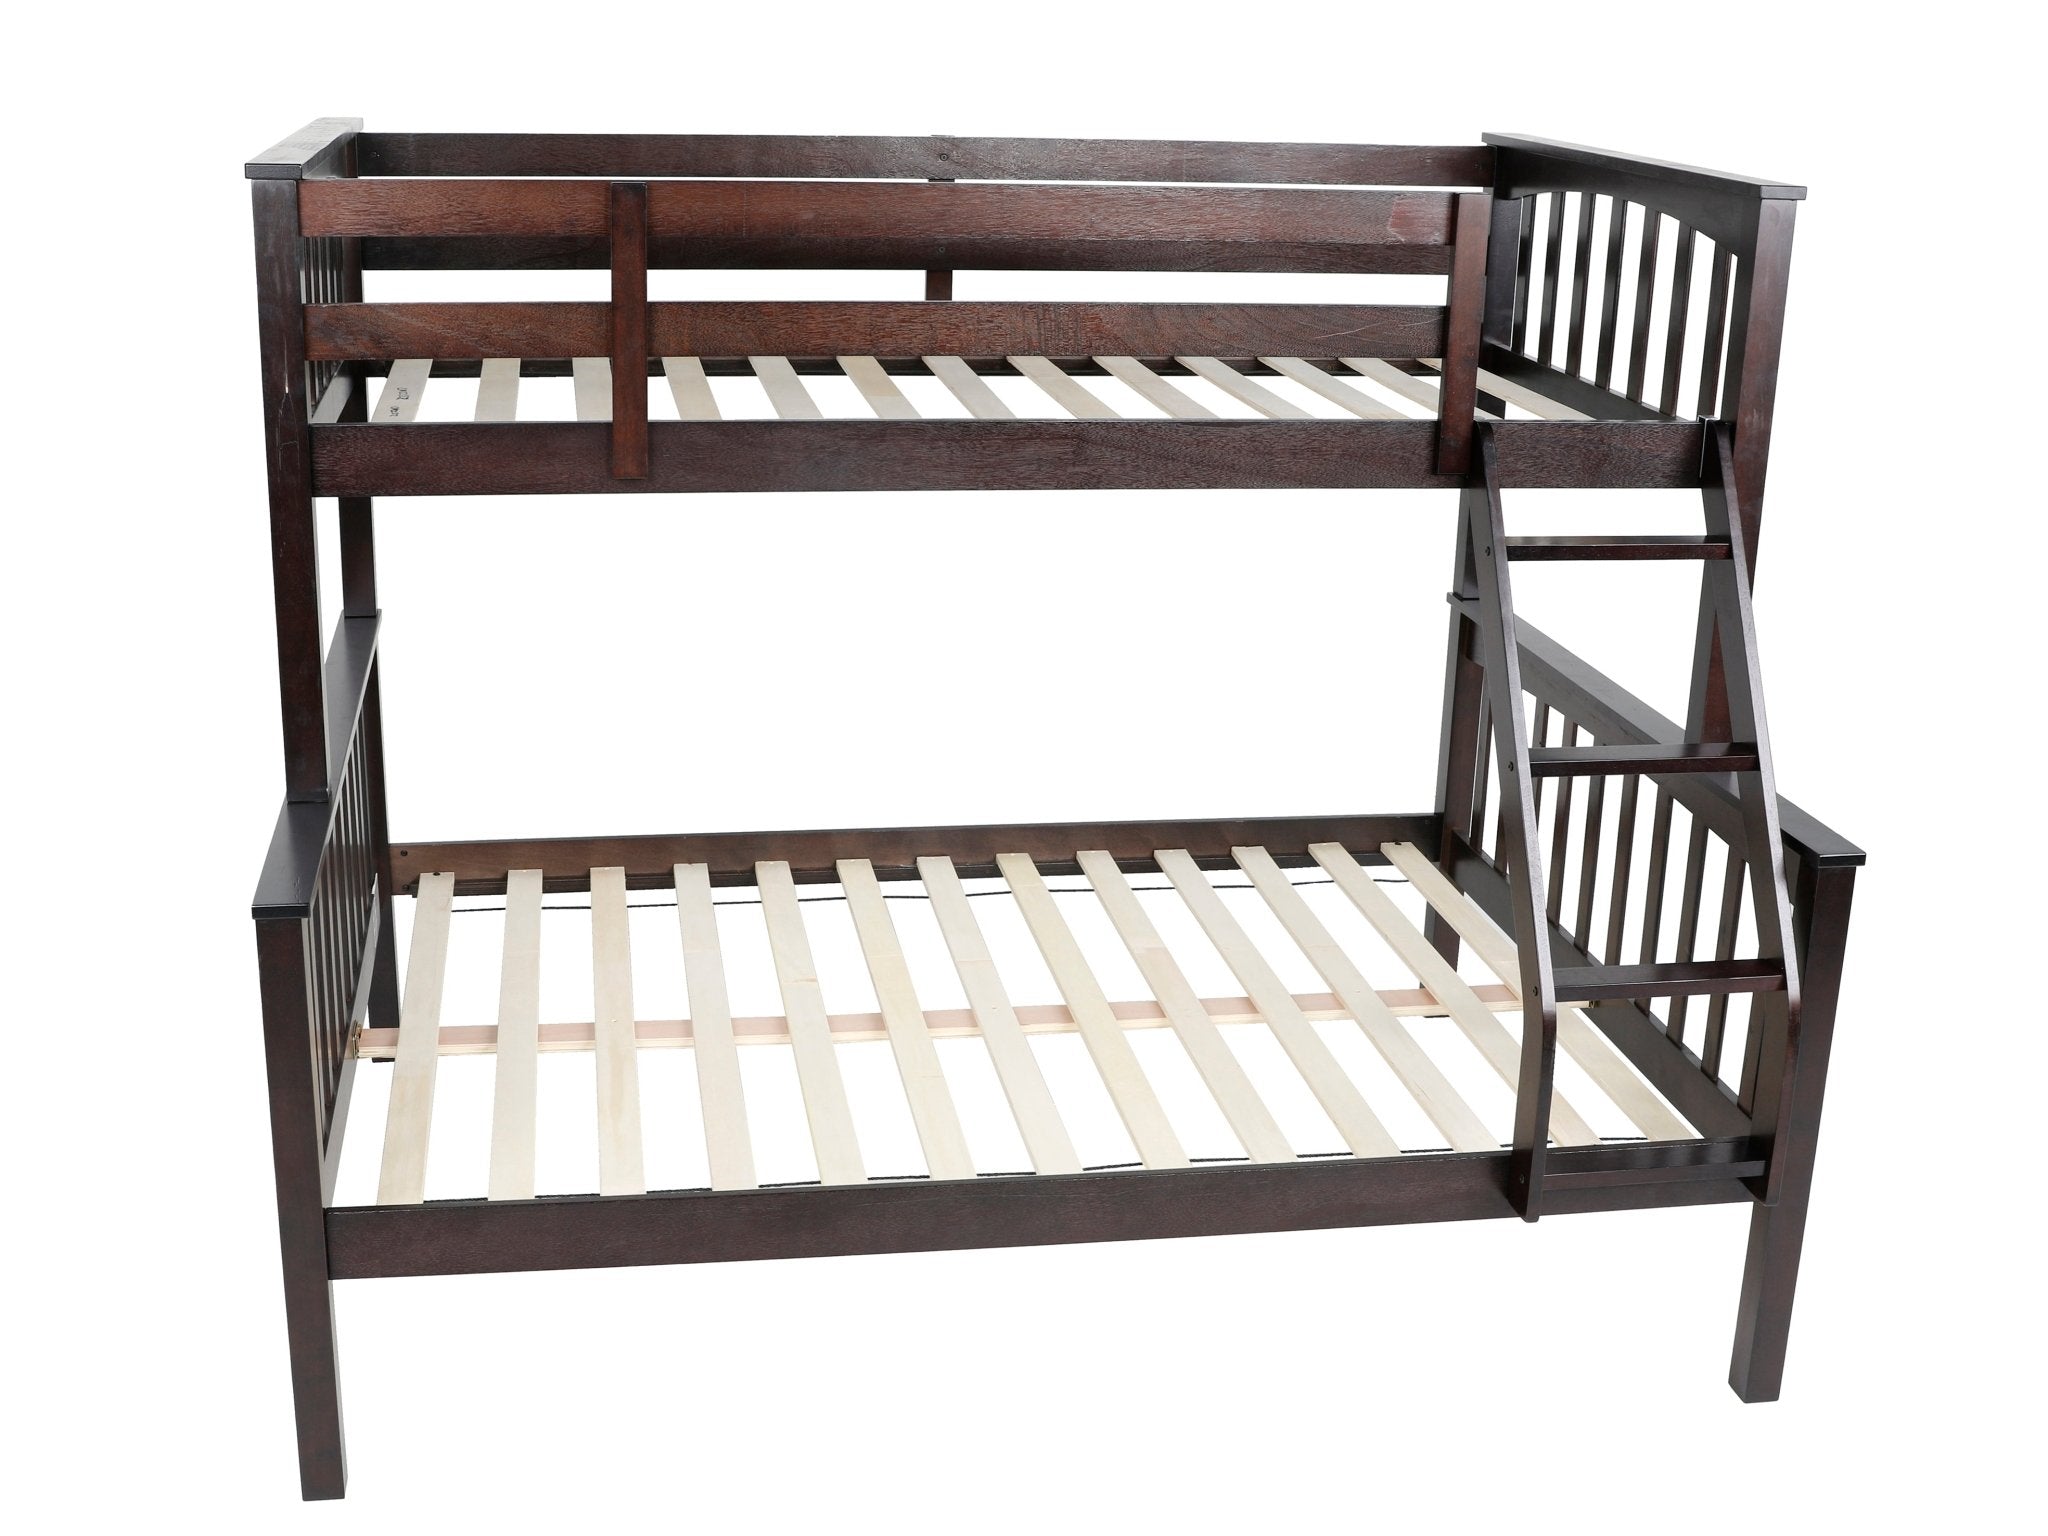 TWIN OVER FULL BUNK BED - BEL Furniture